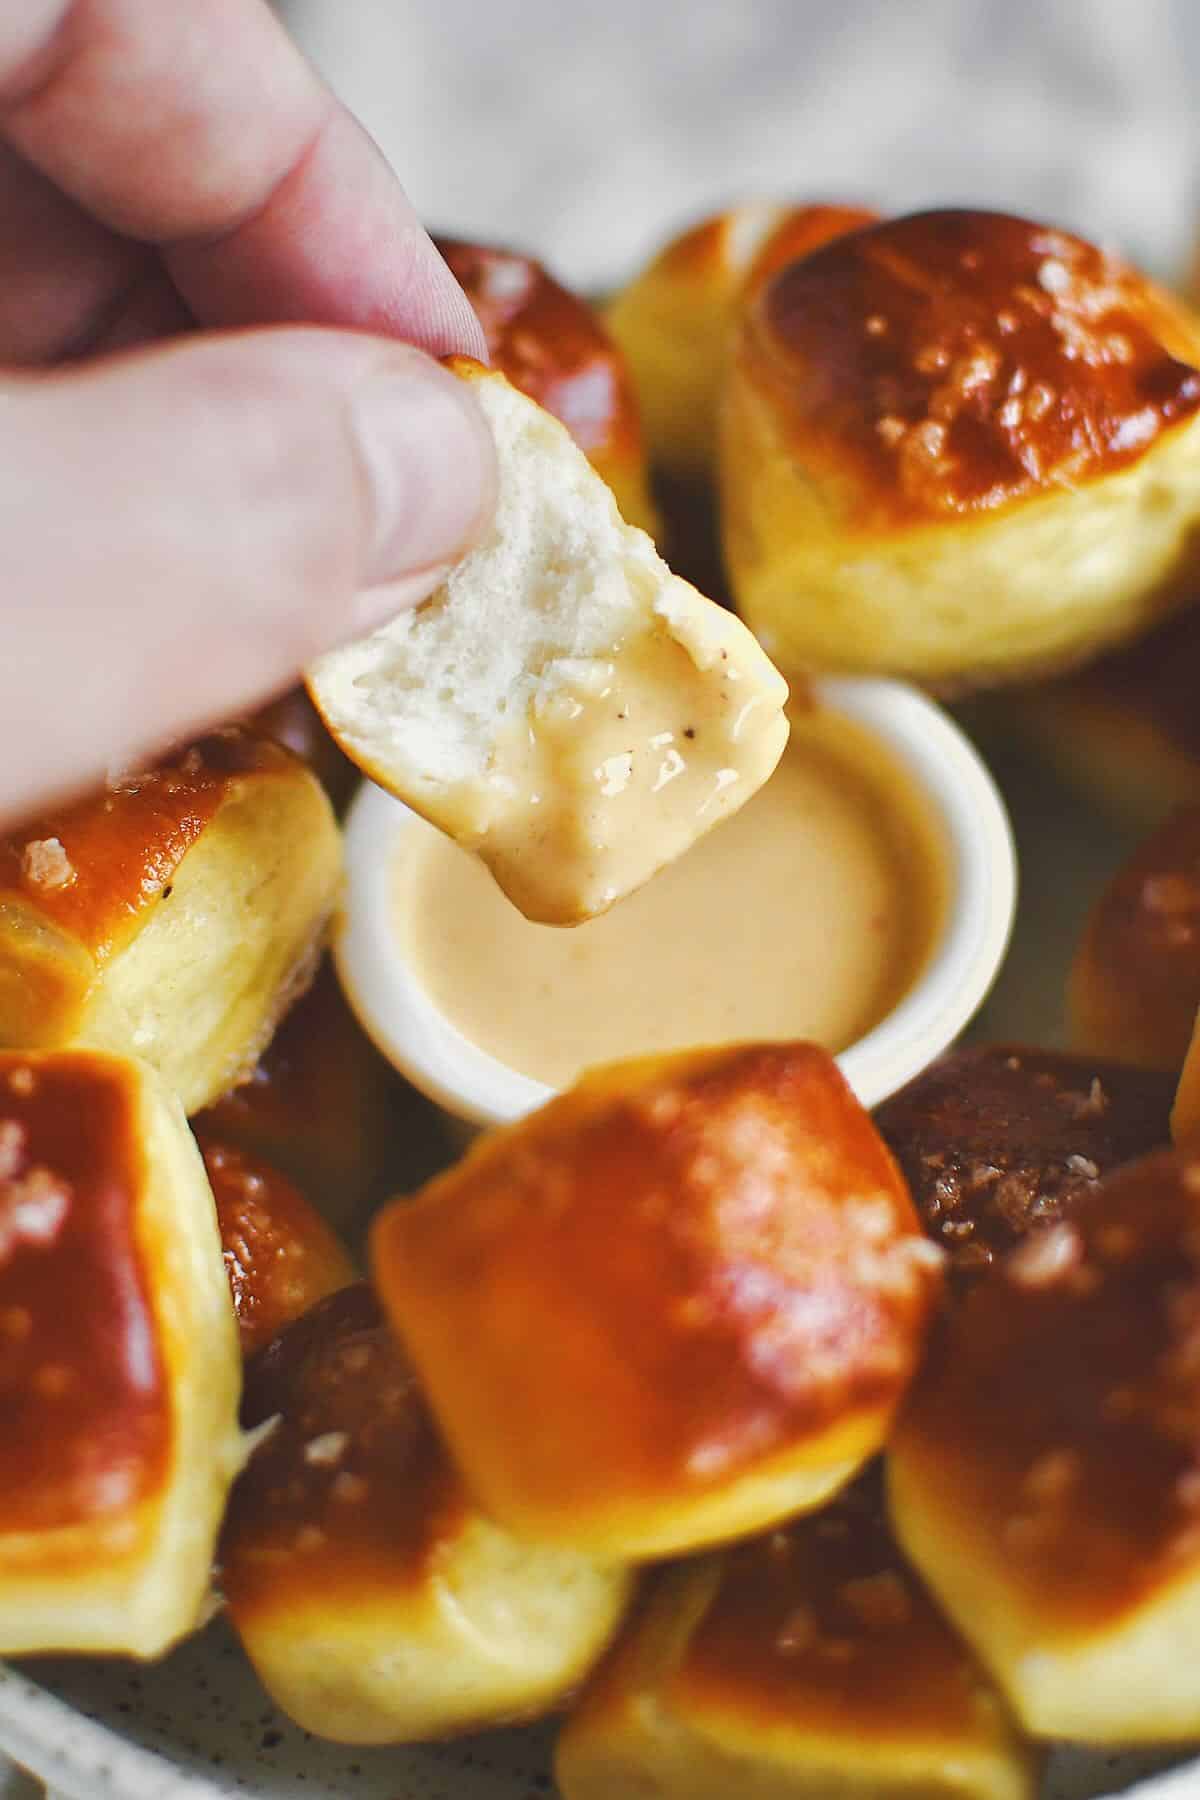 Dipping a split pretzel bite into cheese sauce before eating.